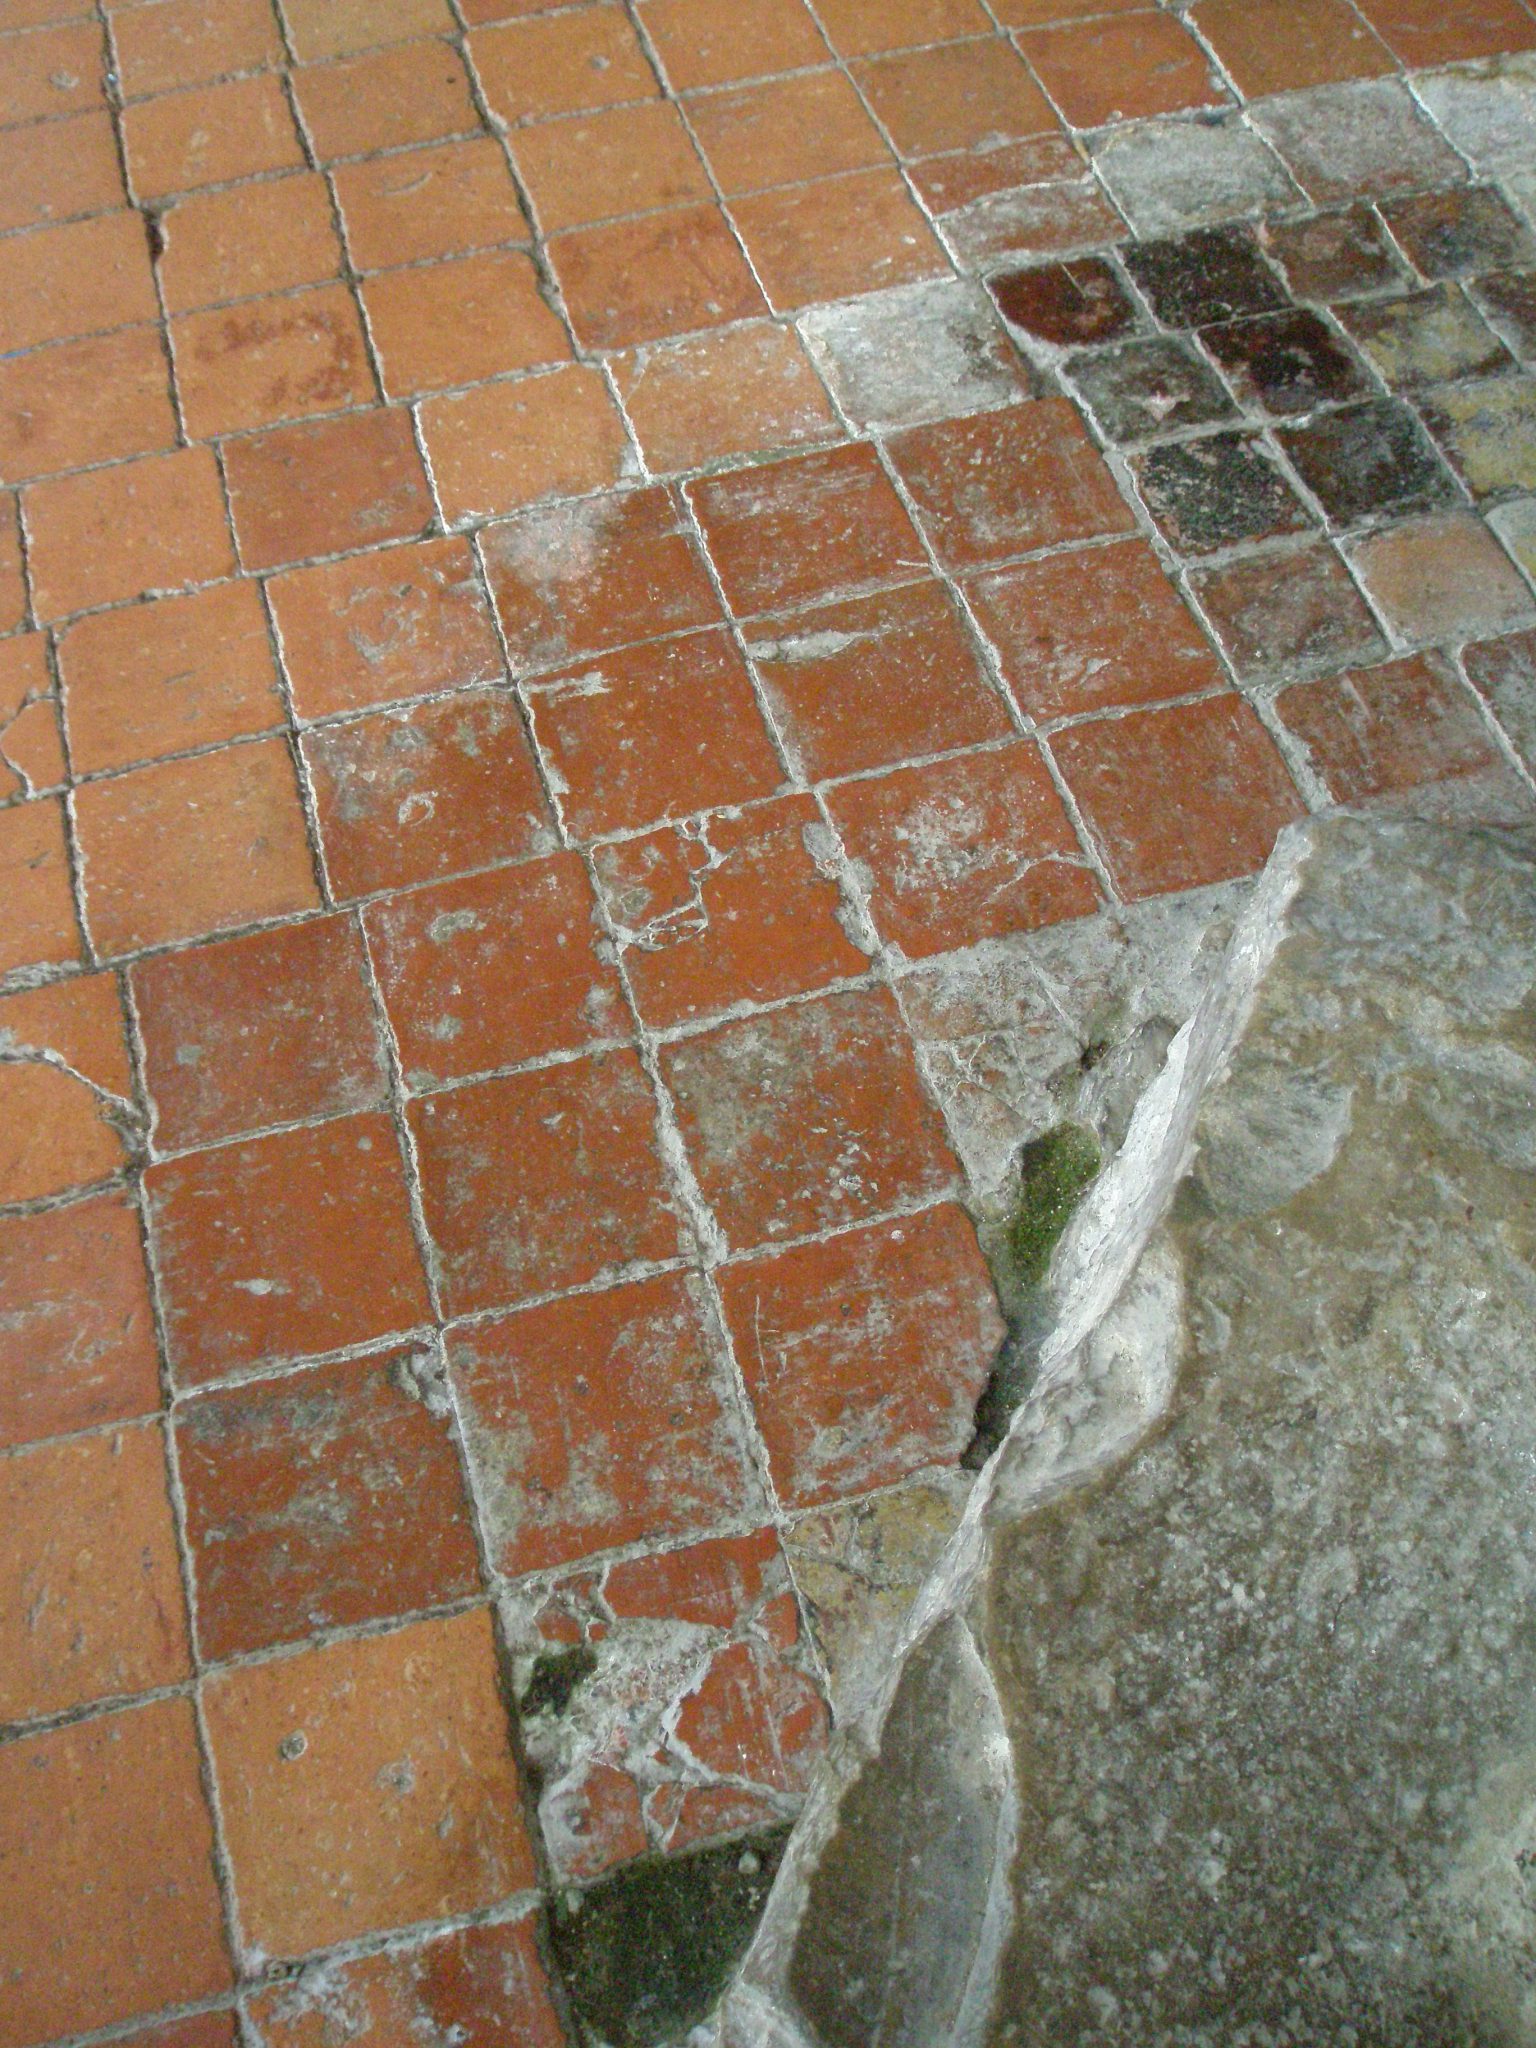 The much-trodden floor tiles of the Church of St.Augustine